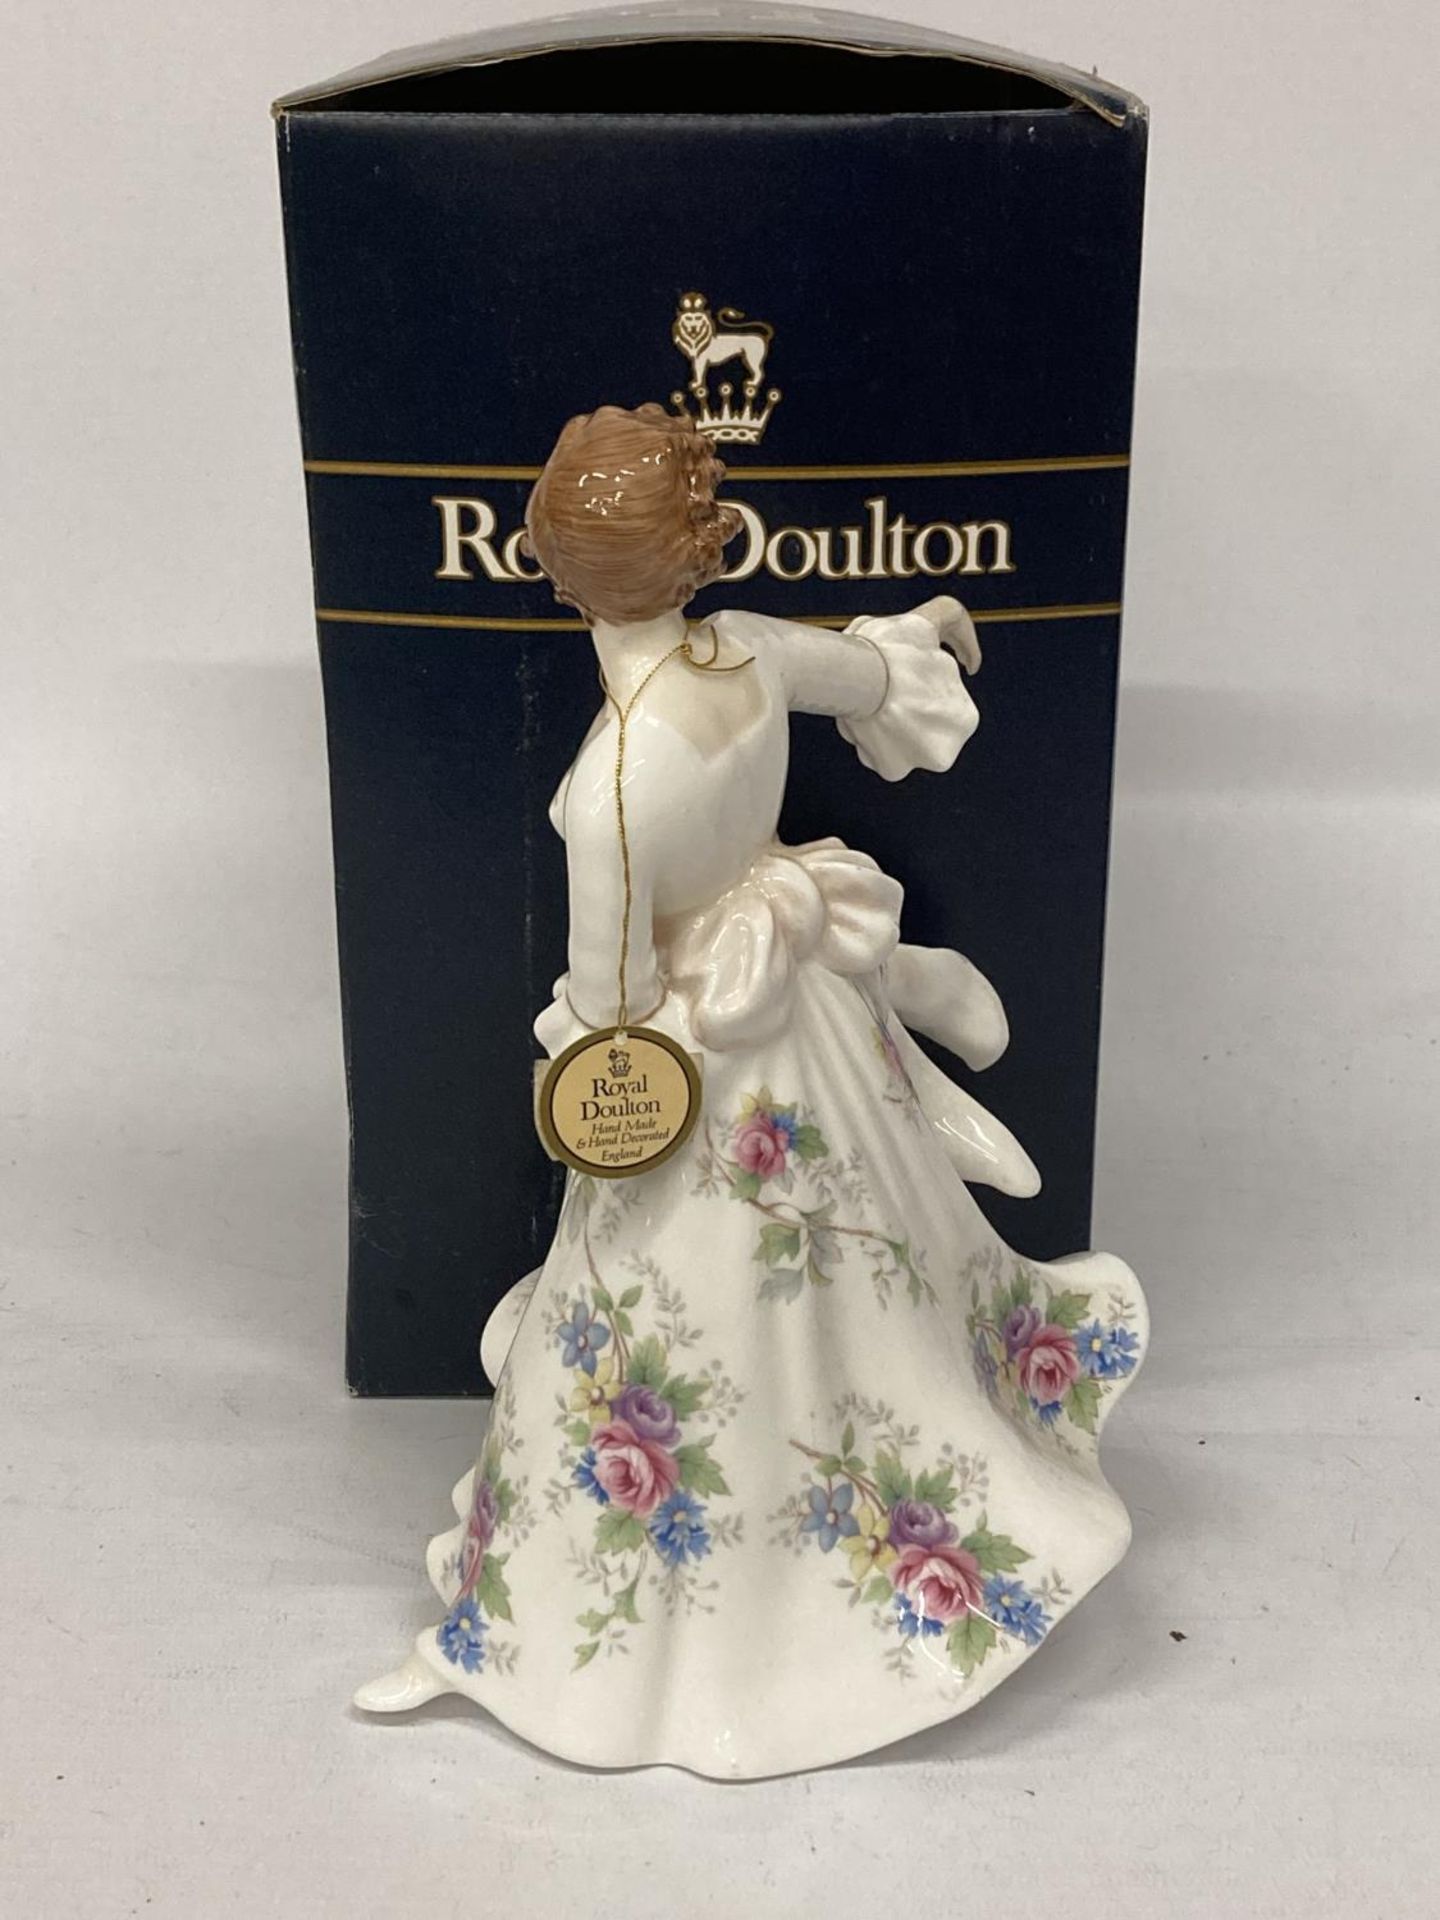 A ROYAL DOULTON FIGURINE MODELLED BY PEGGY DAVIES "HAZEL" HN3167 - Image 3 of 4